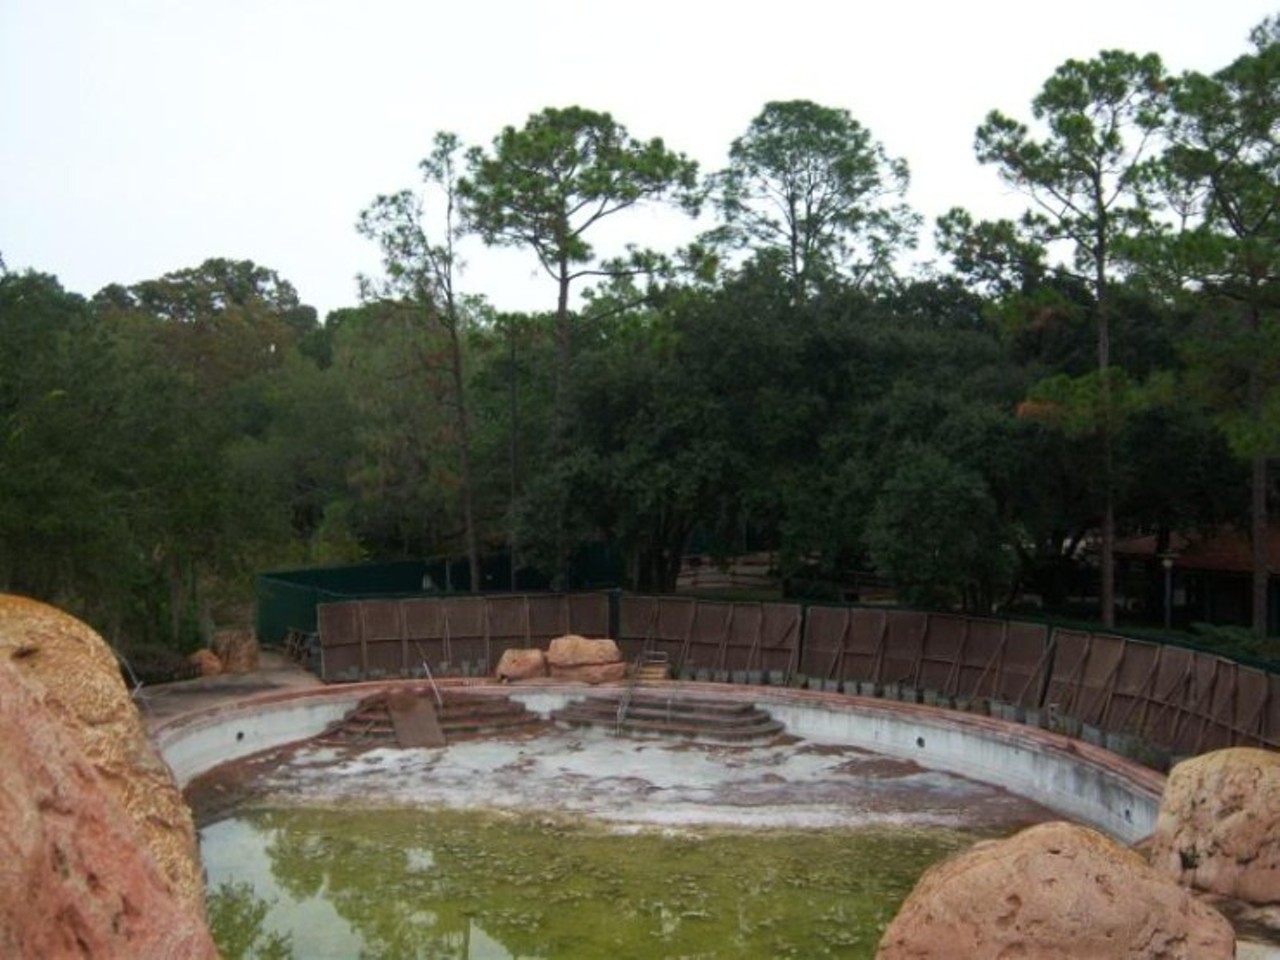 River Country closed in 2001, and Walt Disney World officials said at the time that it could reopen someday if there was enough guest demand. abandonedplaygrounds.com